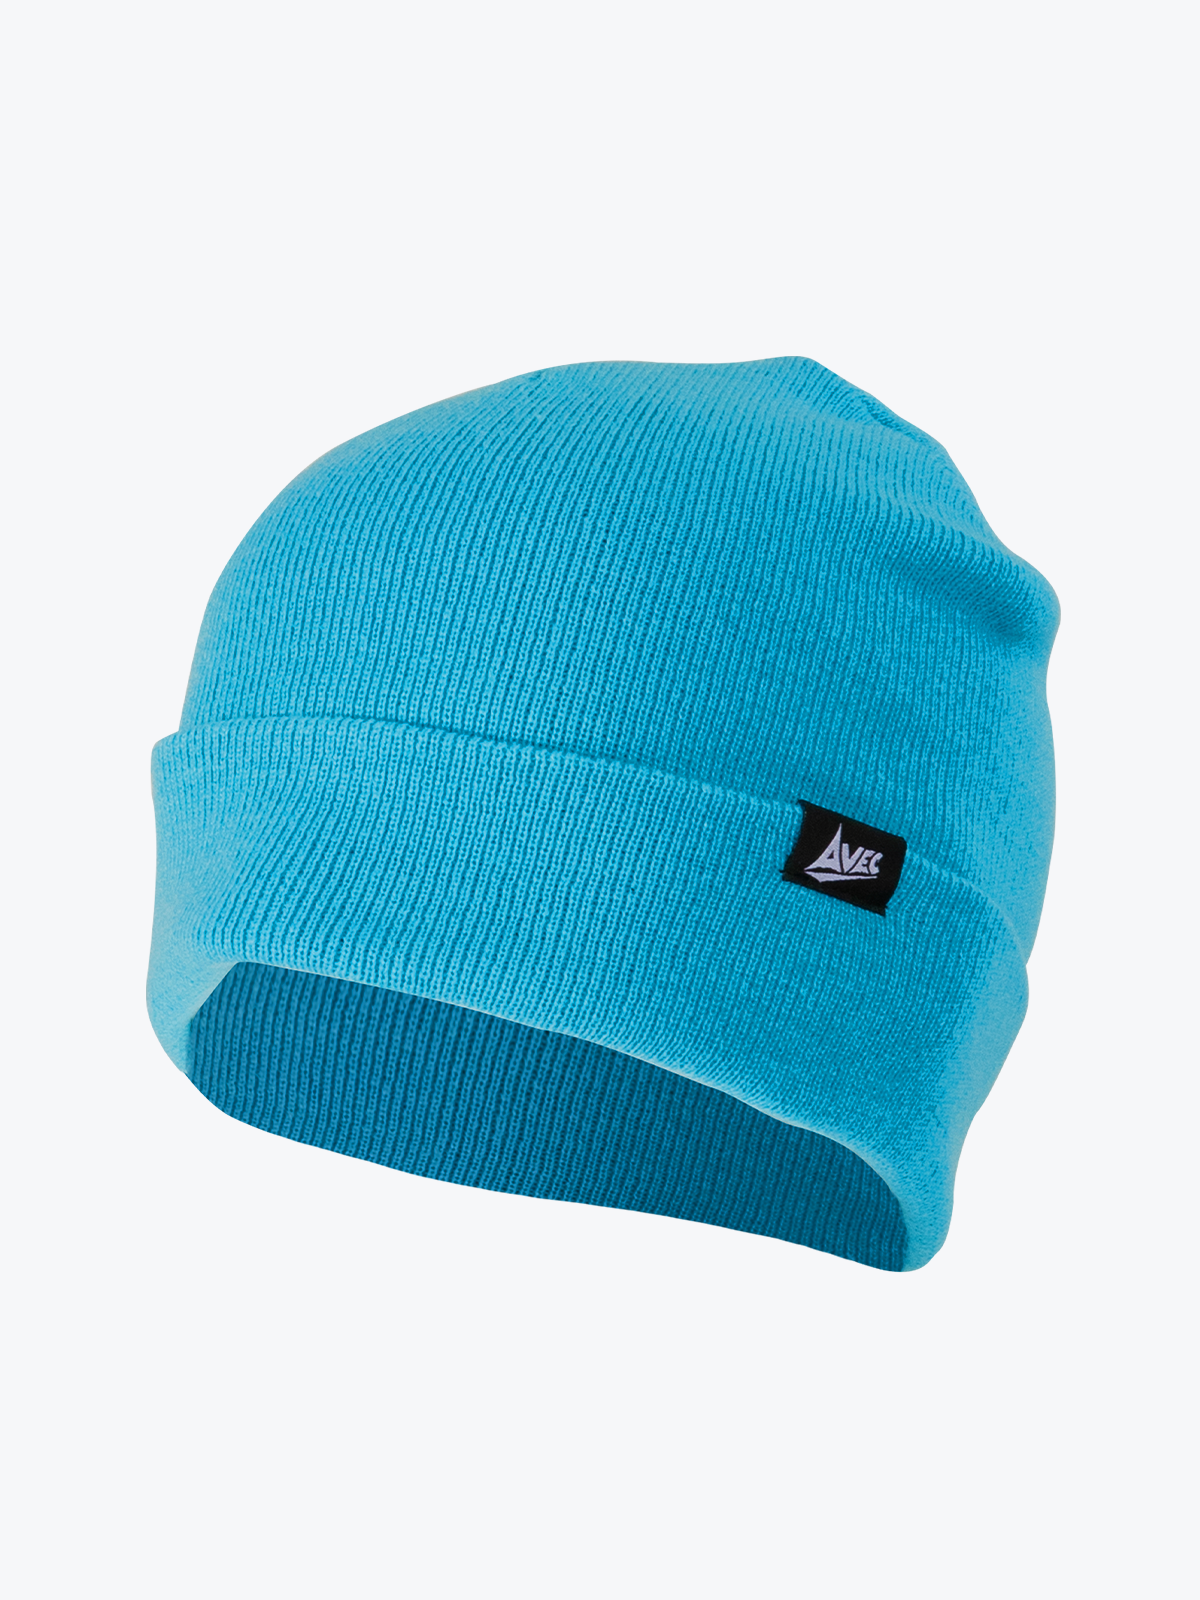 picture of beanie hat - hyper blue